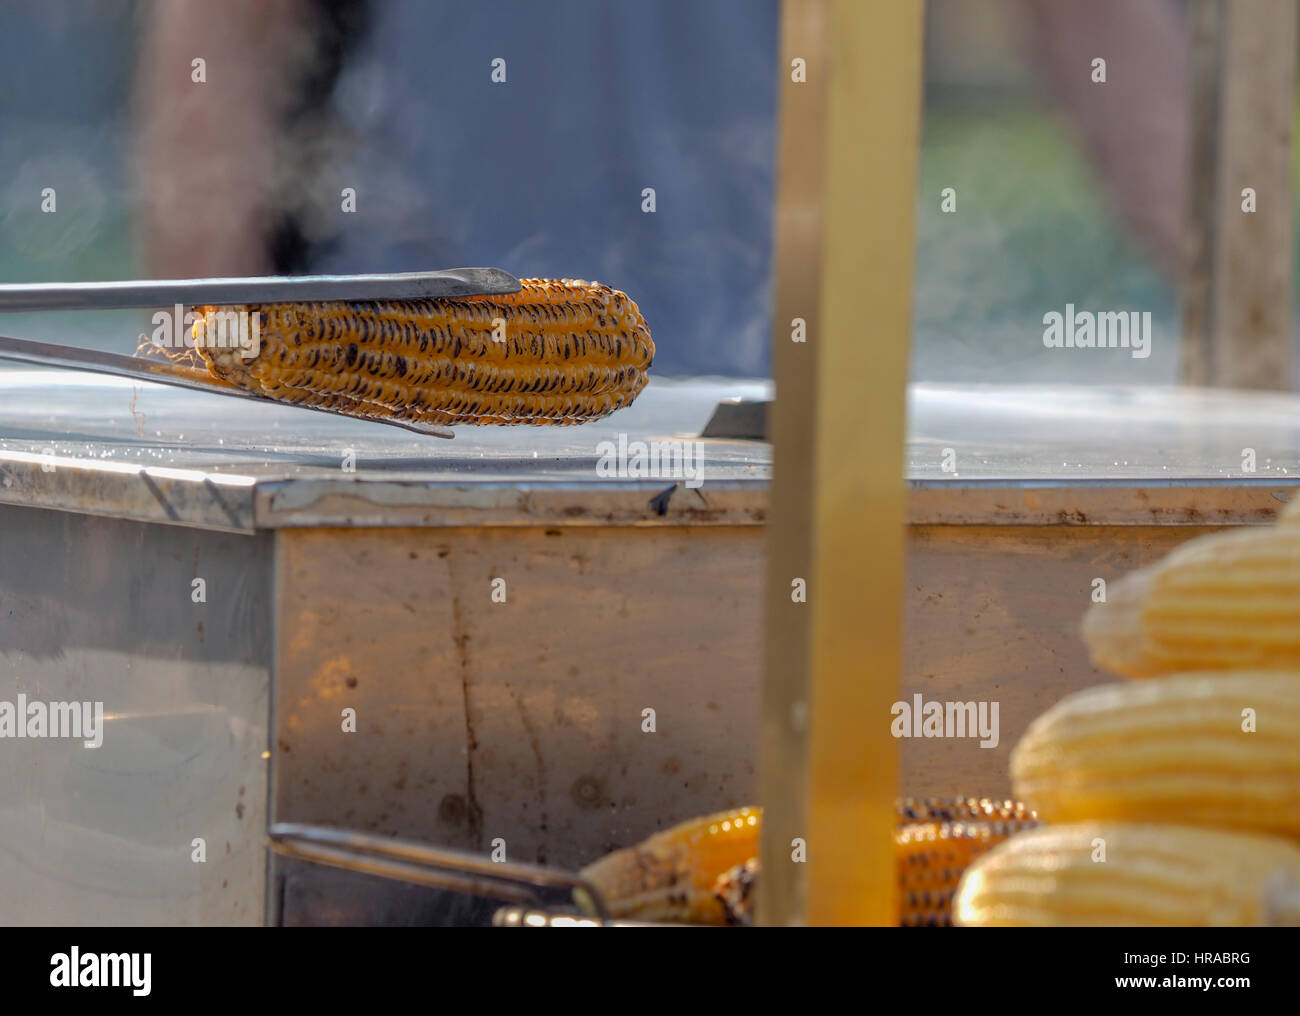 SELLING SWEETCORN FROM TROLLEY Sultanahmet Square Istanbul Turkey Stock Photo